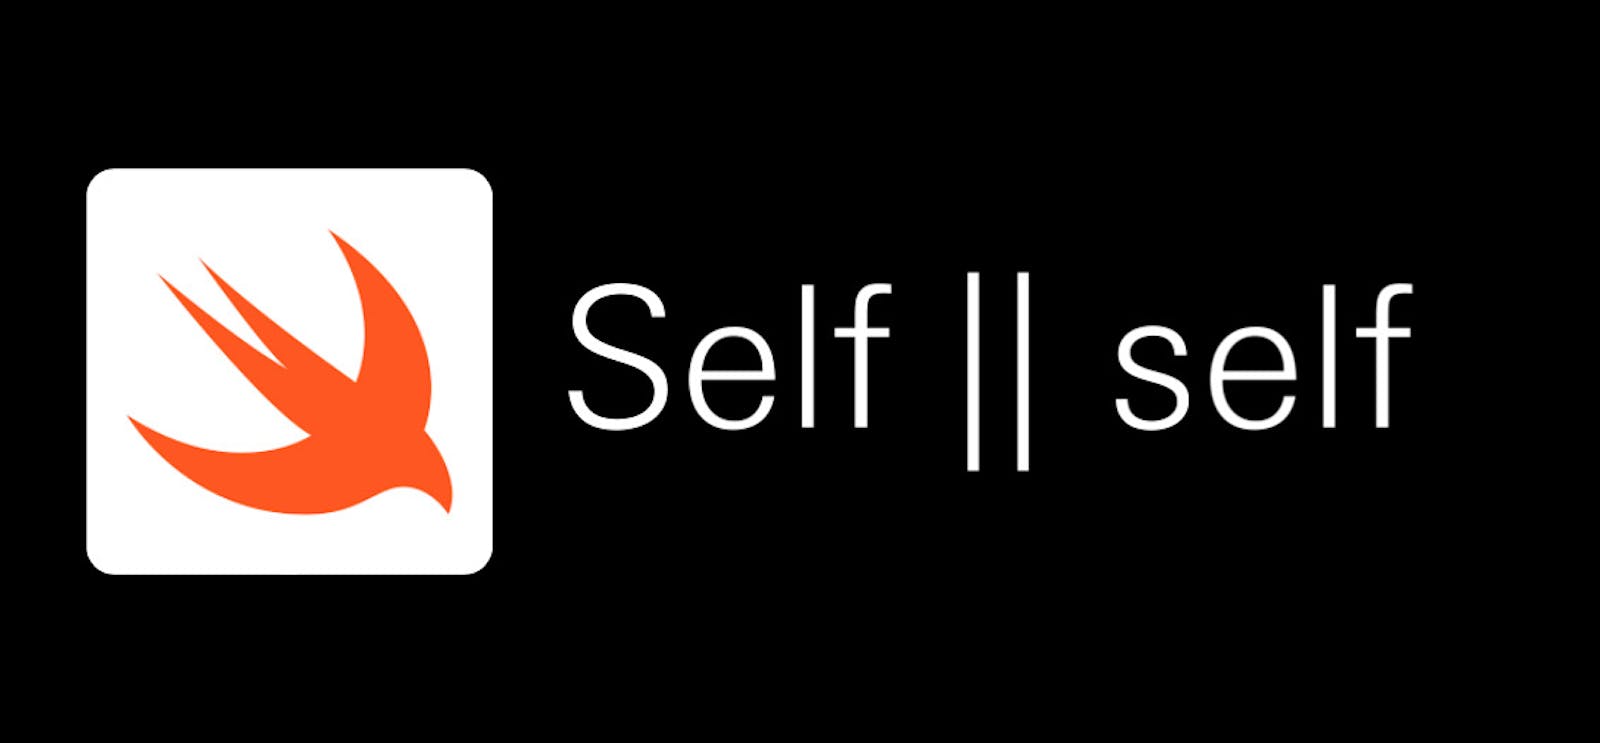 Different between Self and self in Swift